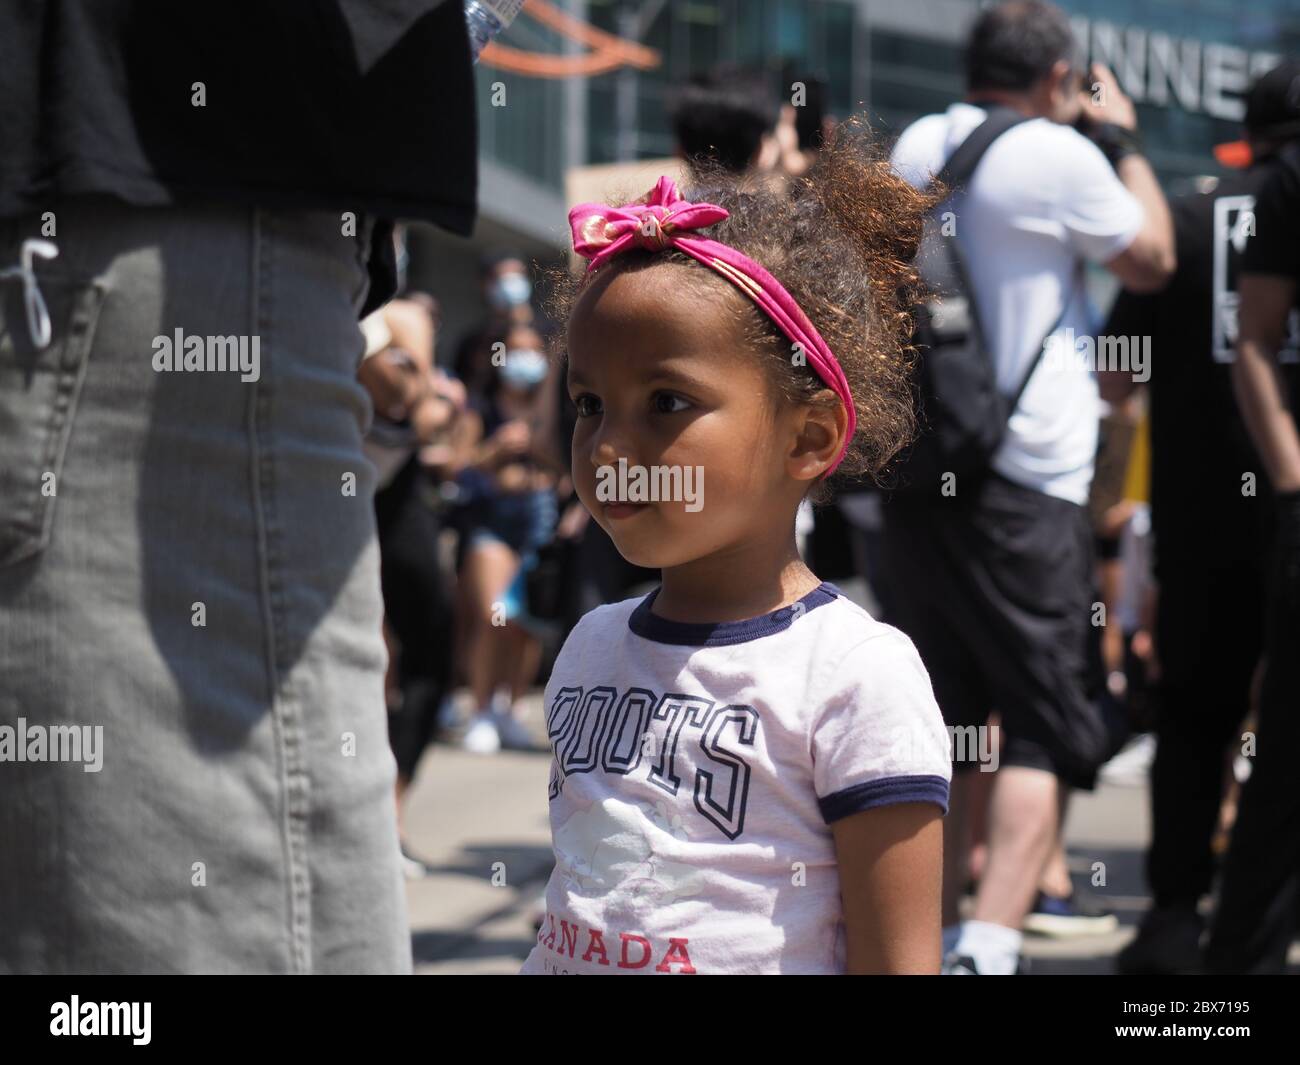 Toronto, Ontario, Canada. 5th June 2020. Black Lives Matter march through downtown Toronto in solidarity with protesters in the United States and around the world. Credit: Arlyn McAdorey/Alamy Live News. Stock Photo